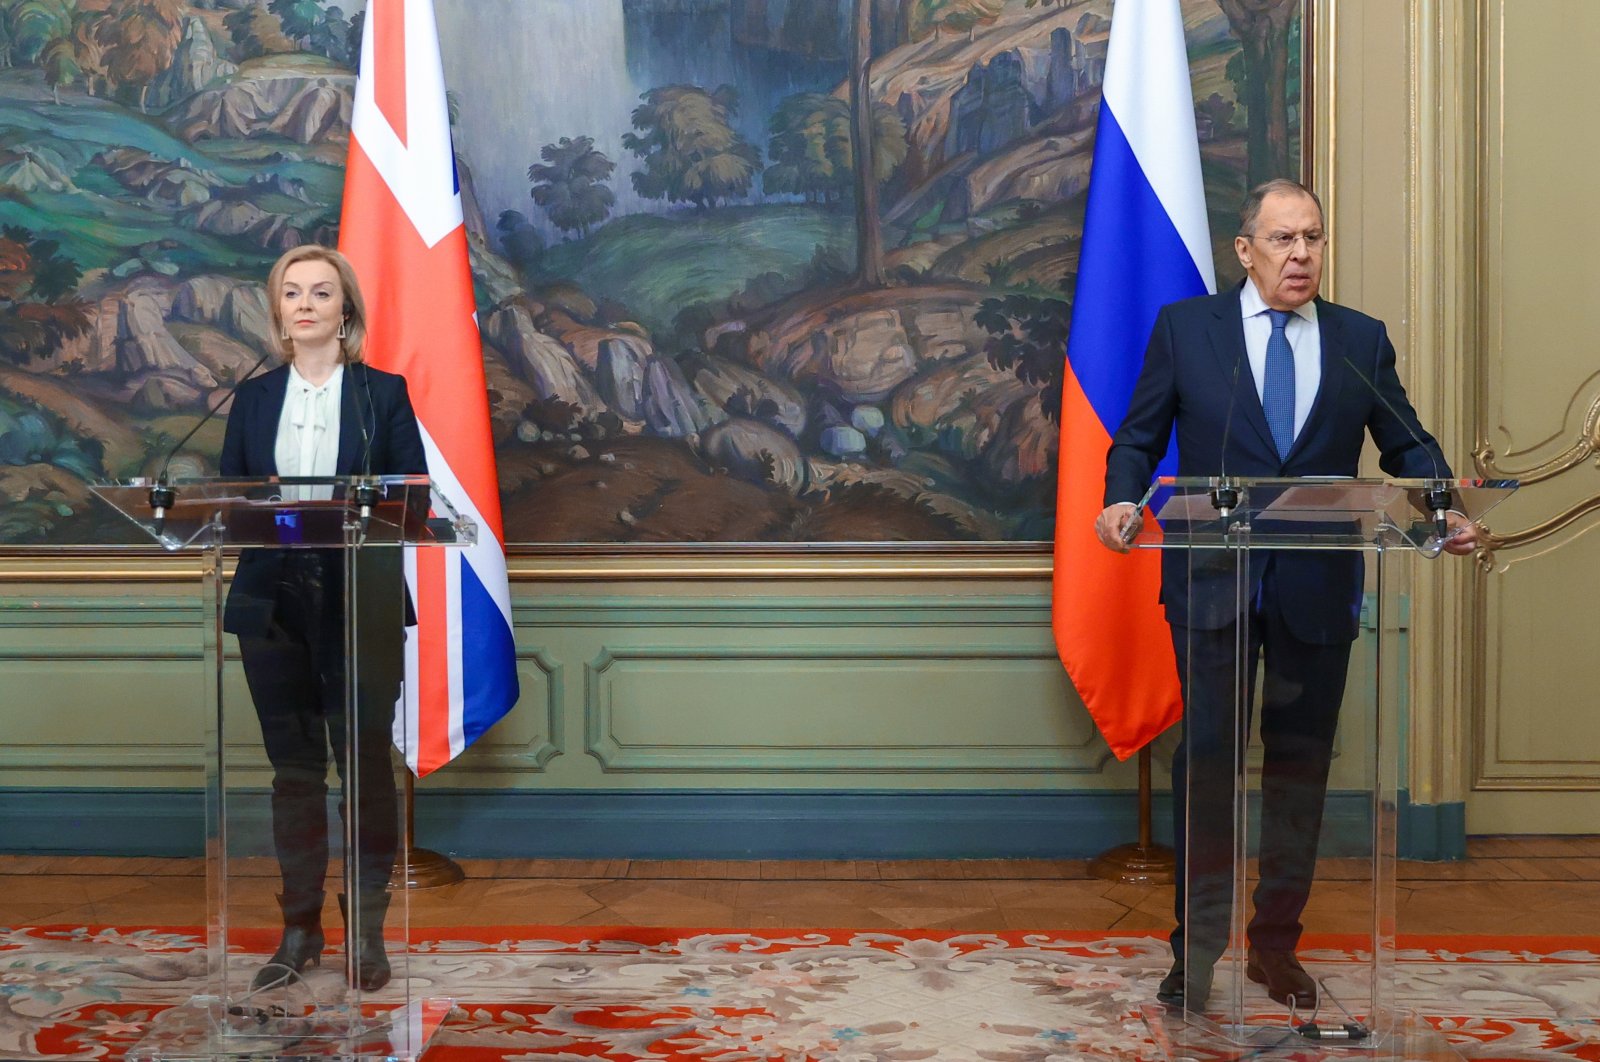 A handout photo made available by the press service of the Russian Foreign Affairs Ministry shows Russian Foreign Minister Sergey Lavrov (R) and British Foreign Secretary Elizabeth Truss (L) during a joint news conference following their talks in Moscow, Russia, Feb. 10, 2022. (EPA Photo)